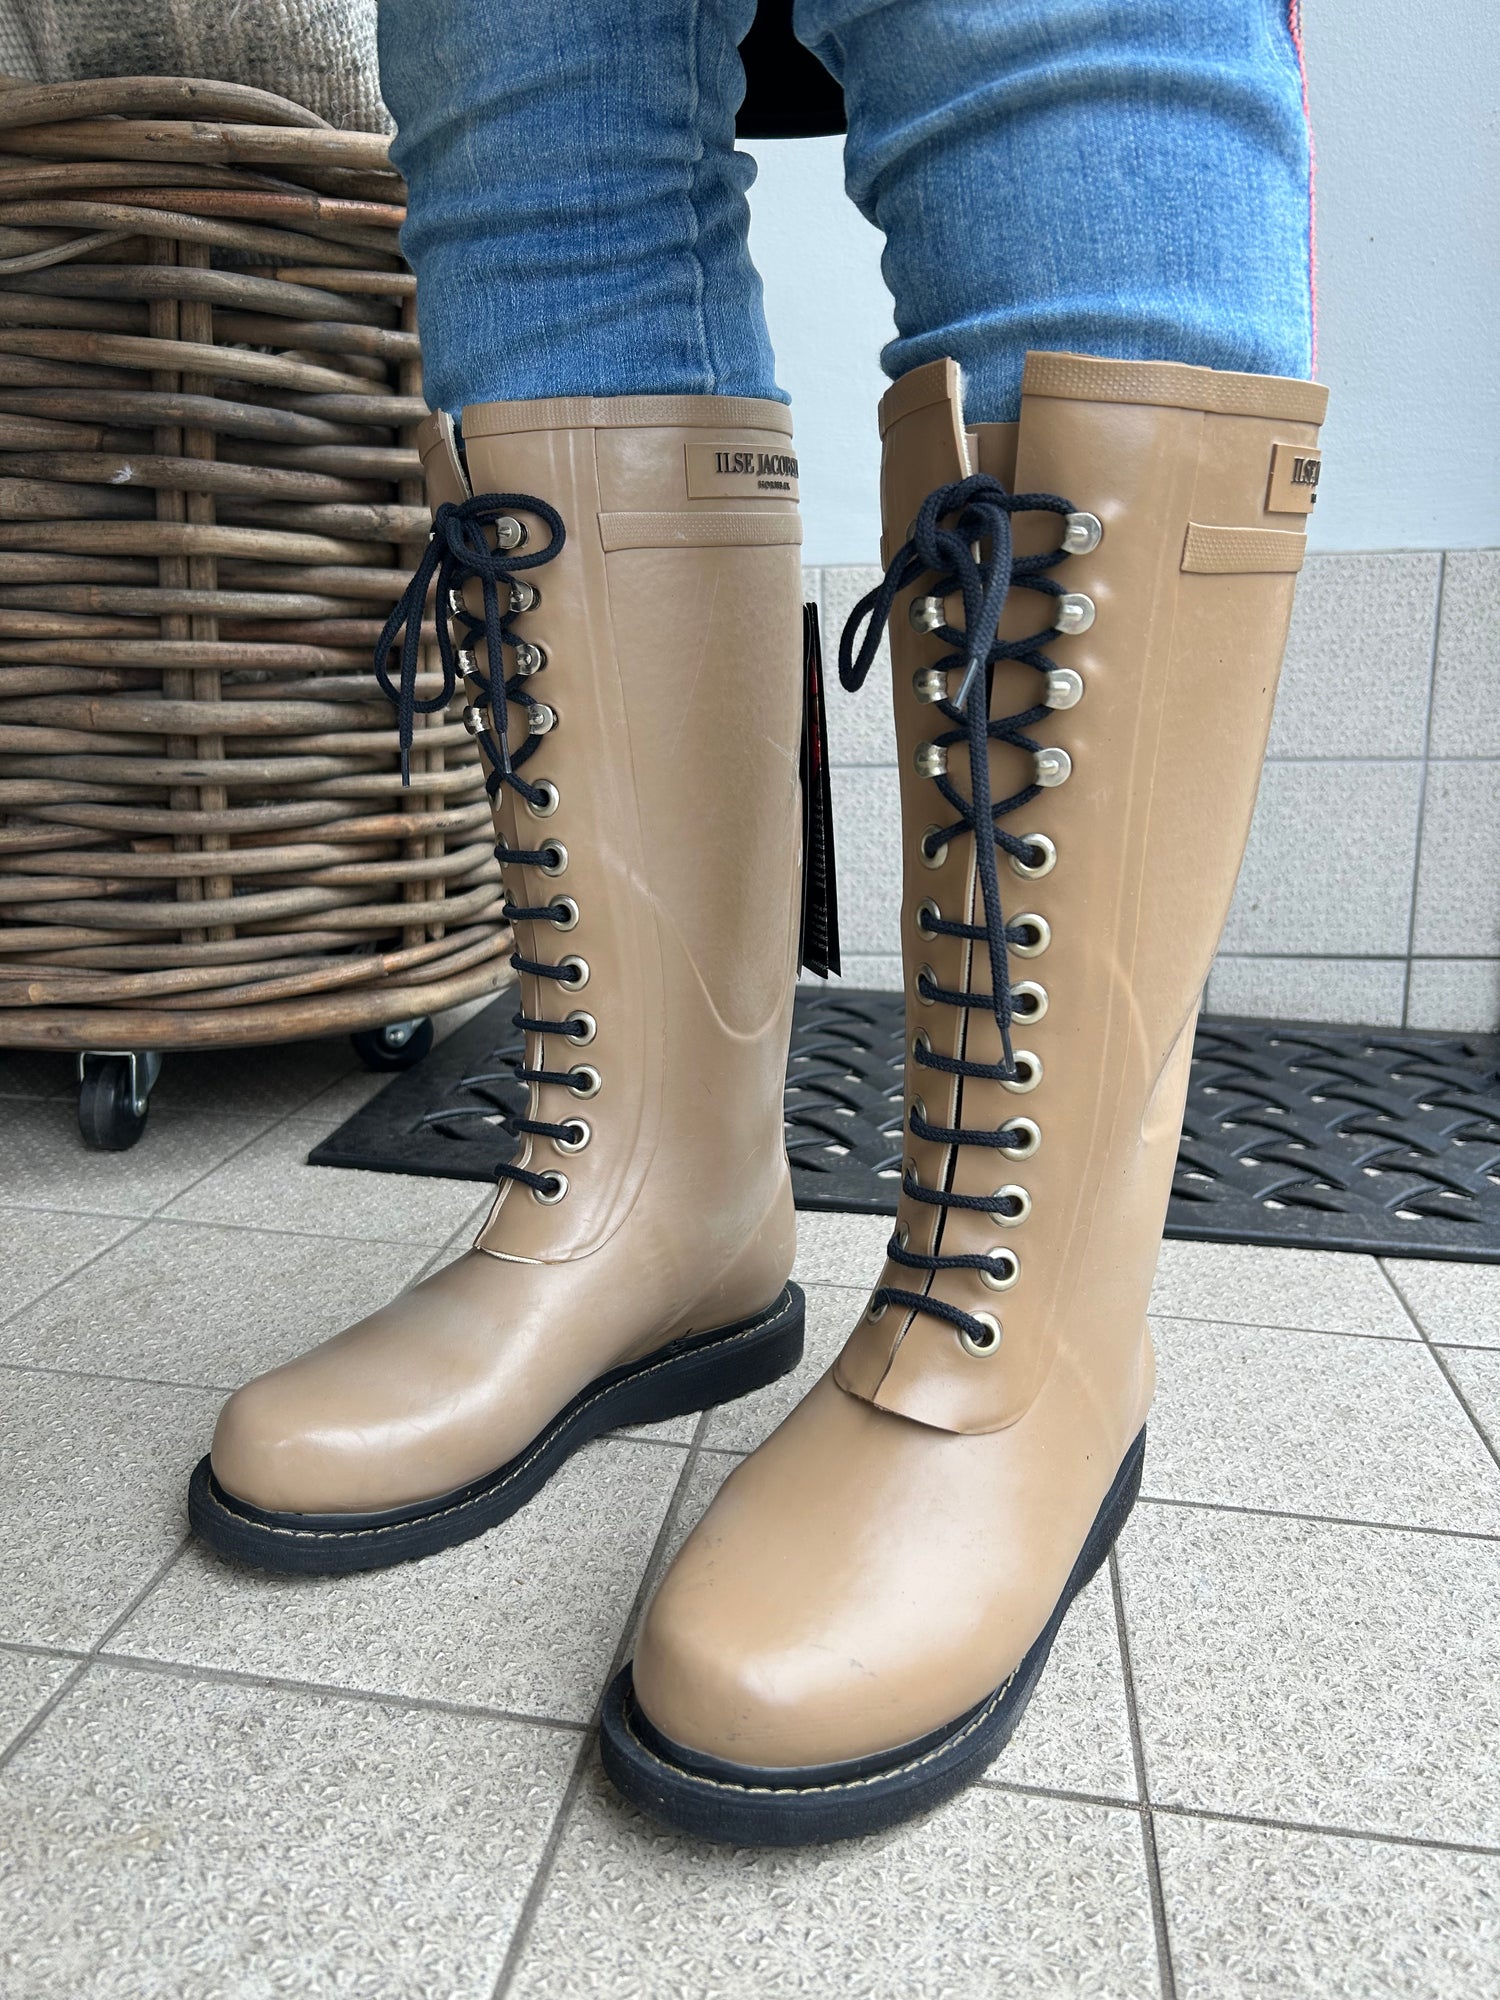 Wellie Boots - RUB1 - Otter